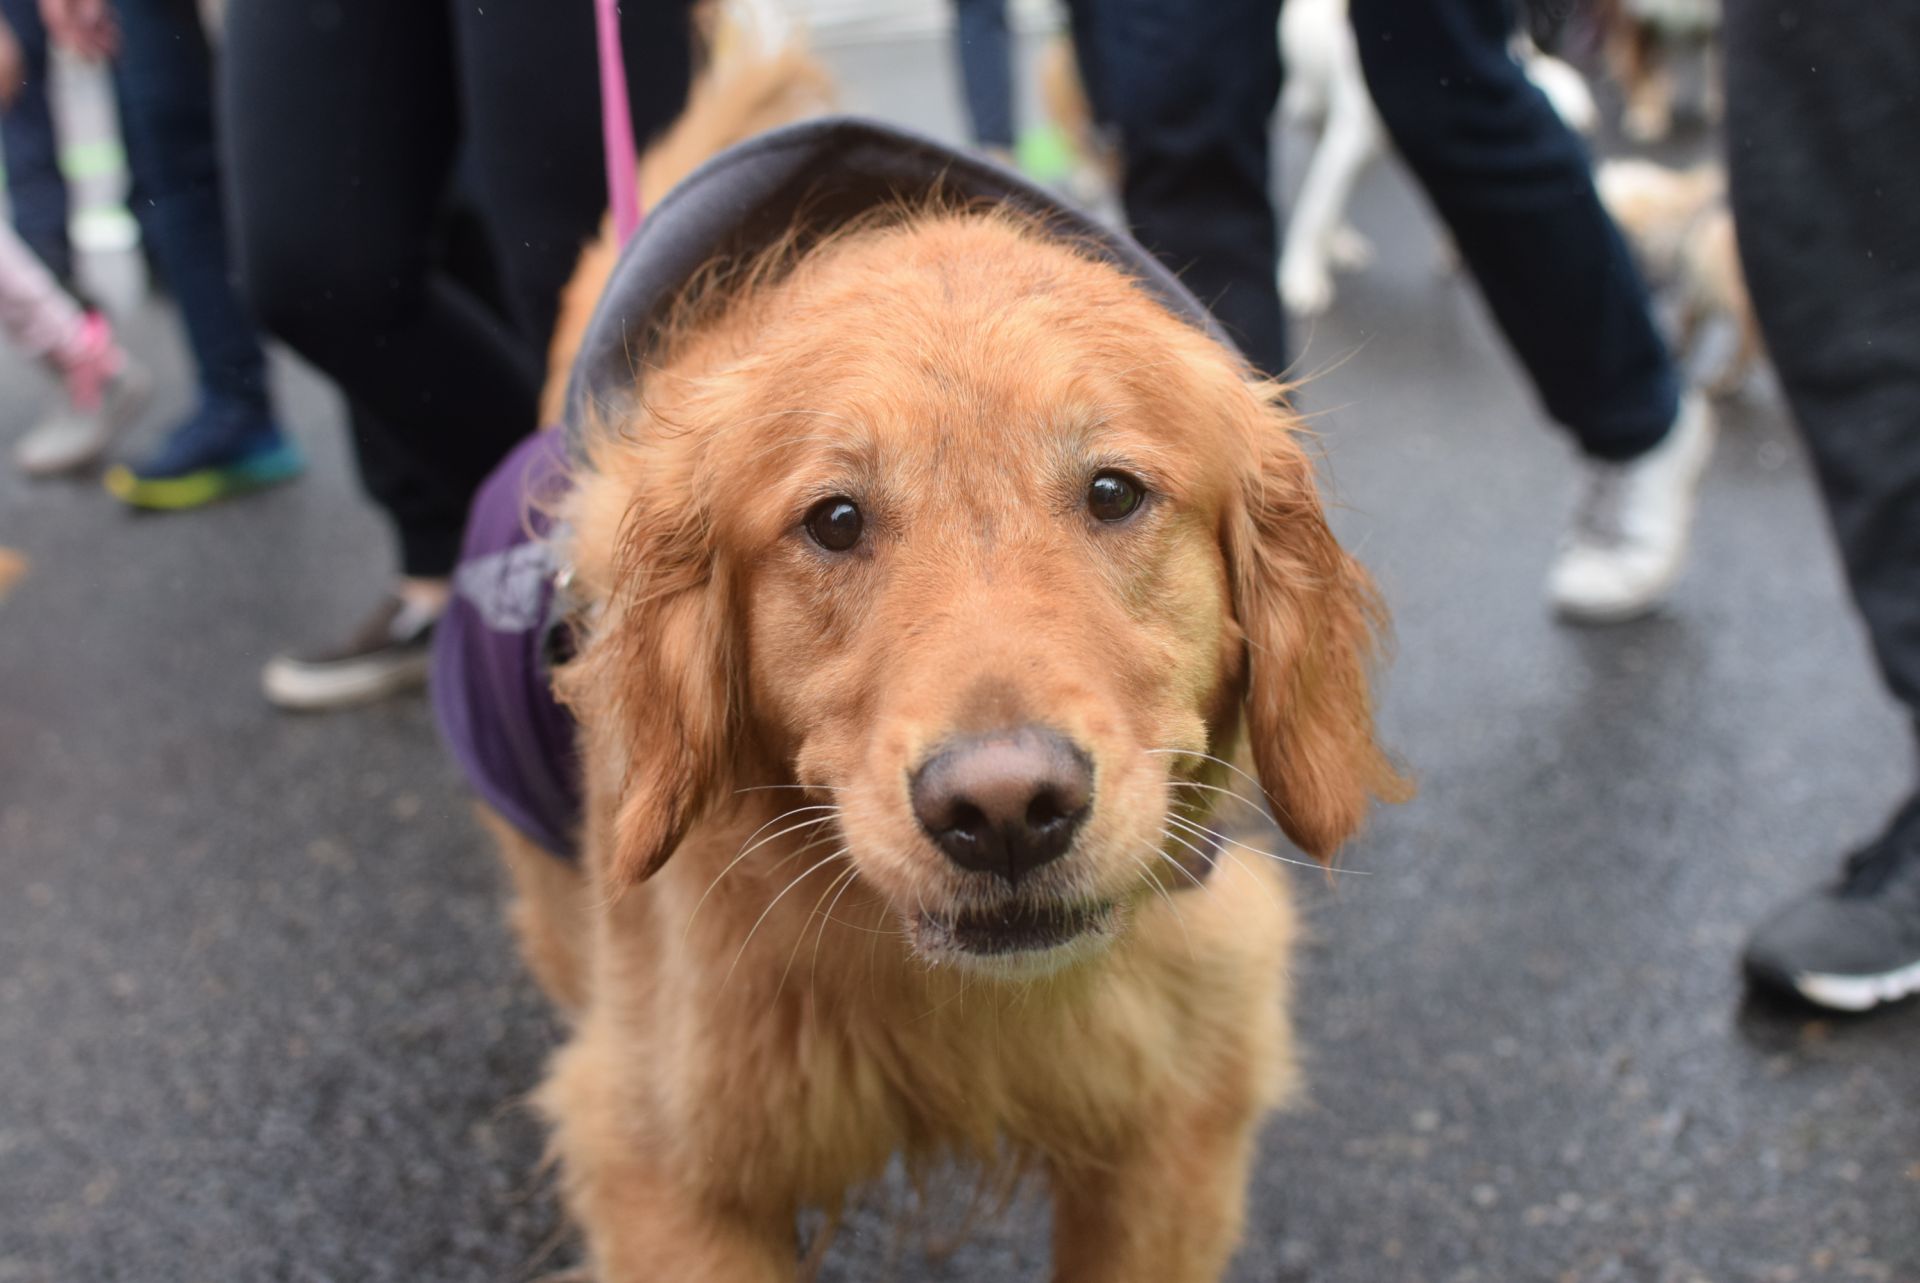 Golden retriever looking right at the camera during the 2022 Doggie Dash event